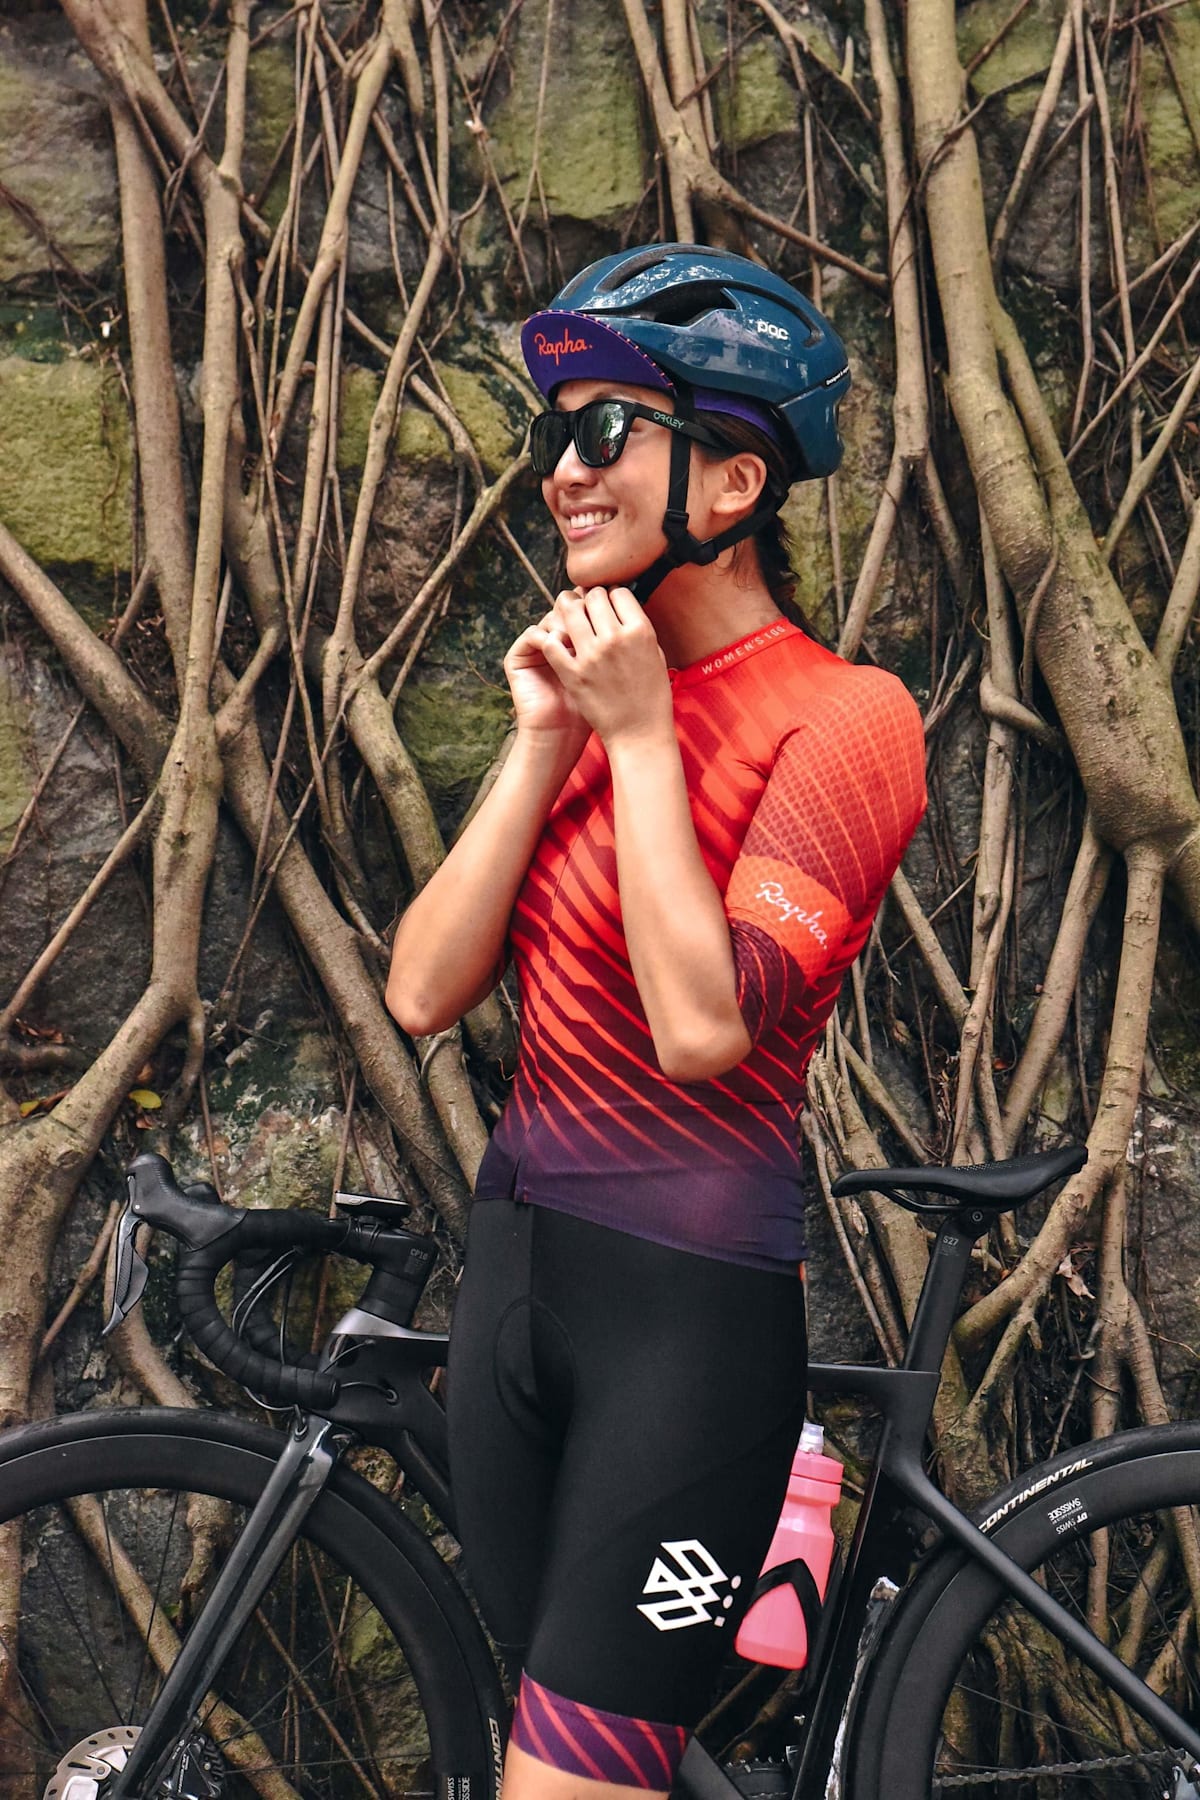 The World's Finest Cycling Clothing and Accessories. | Rapha